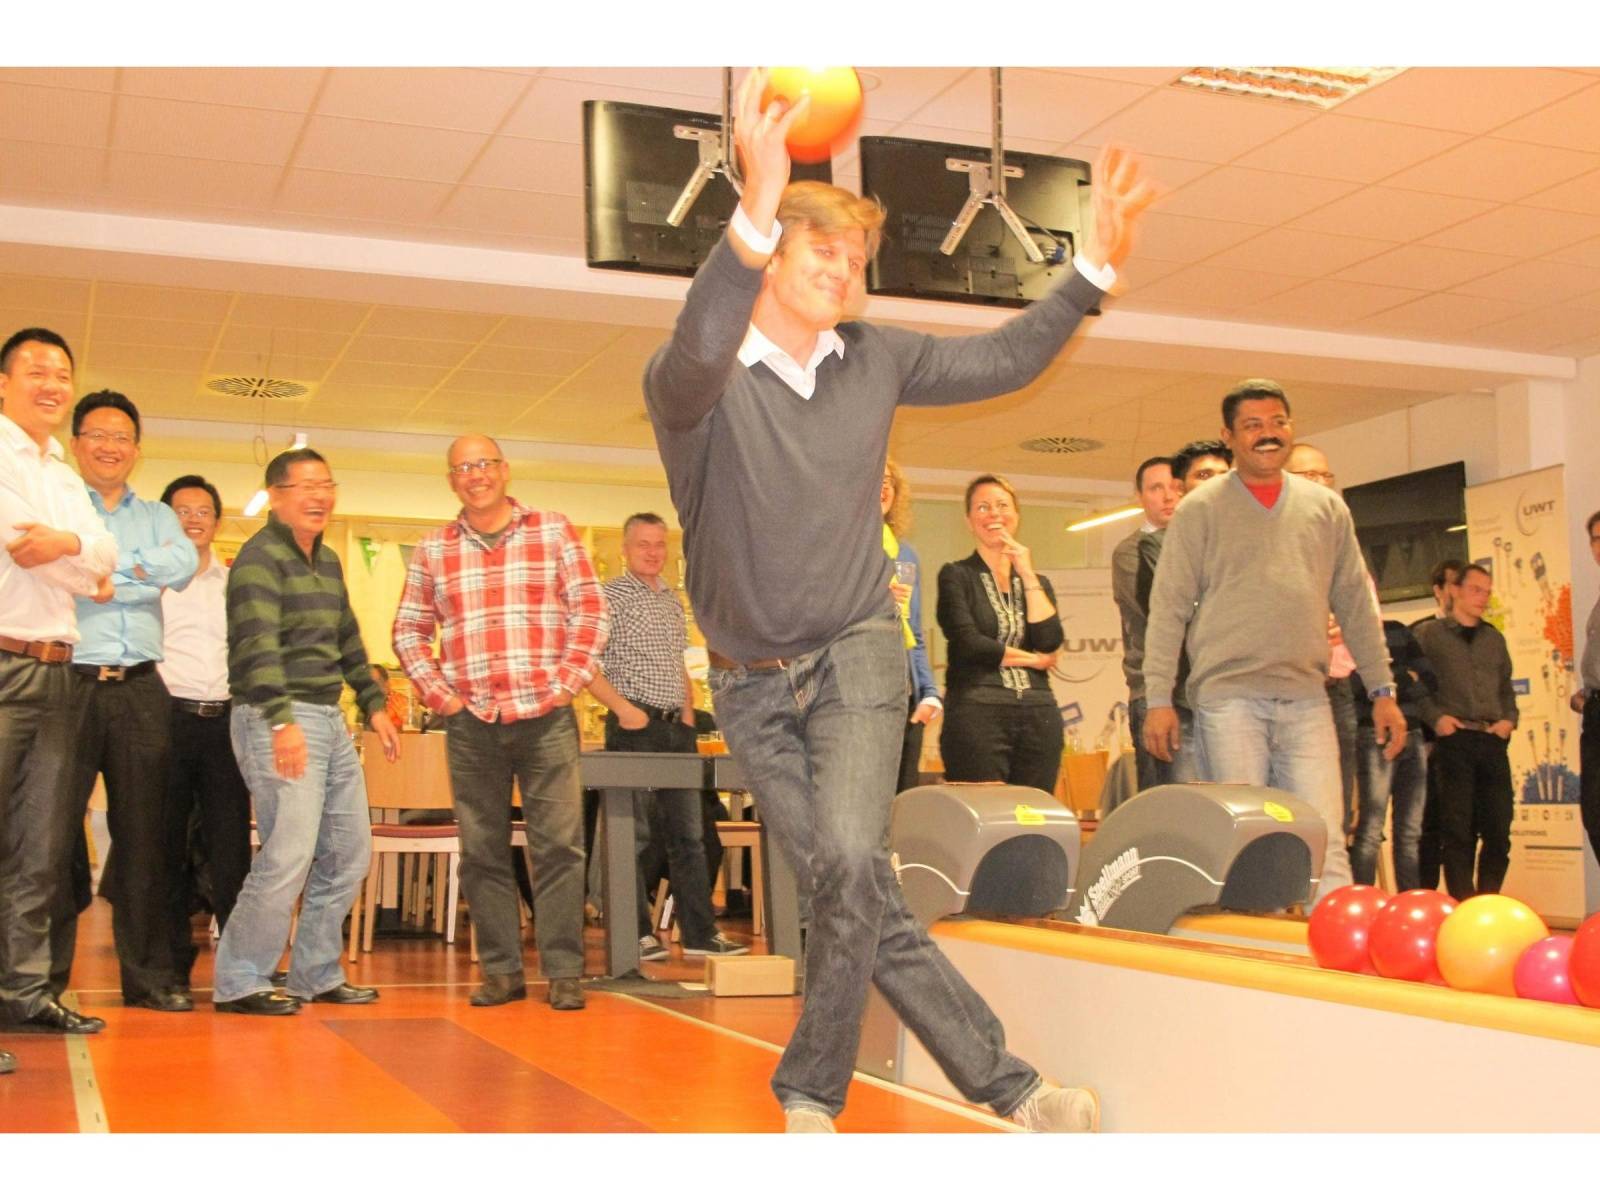 Markus Schalk and the guests are bowling